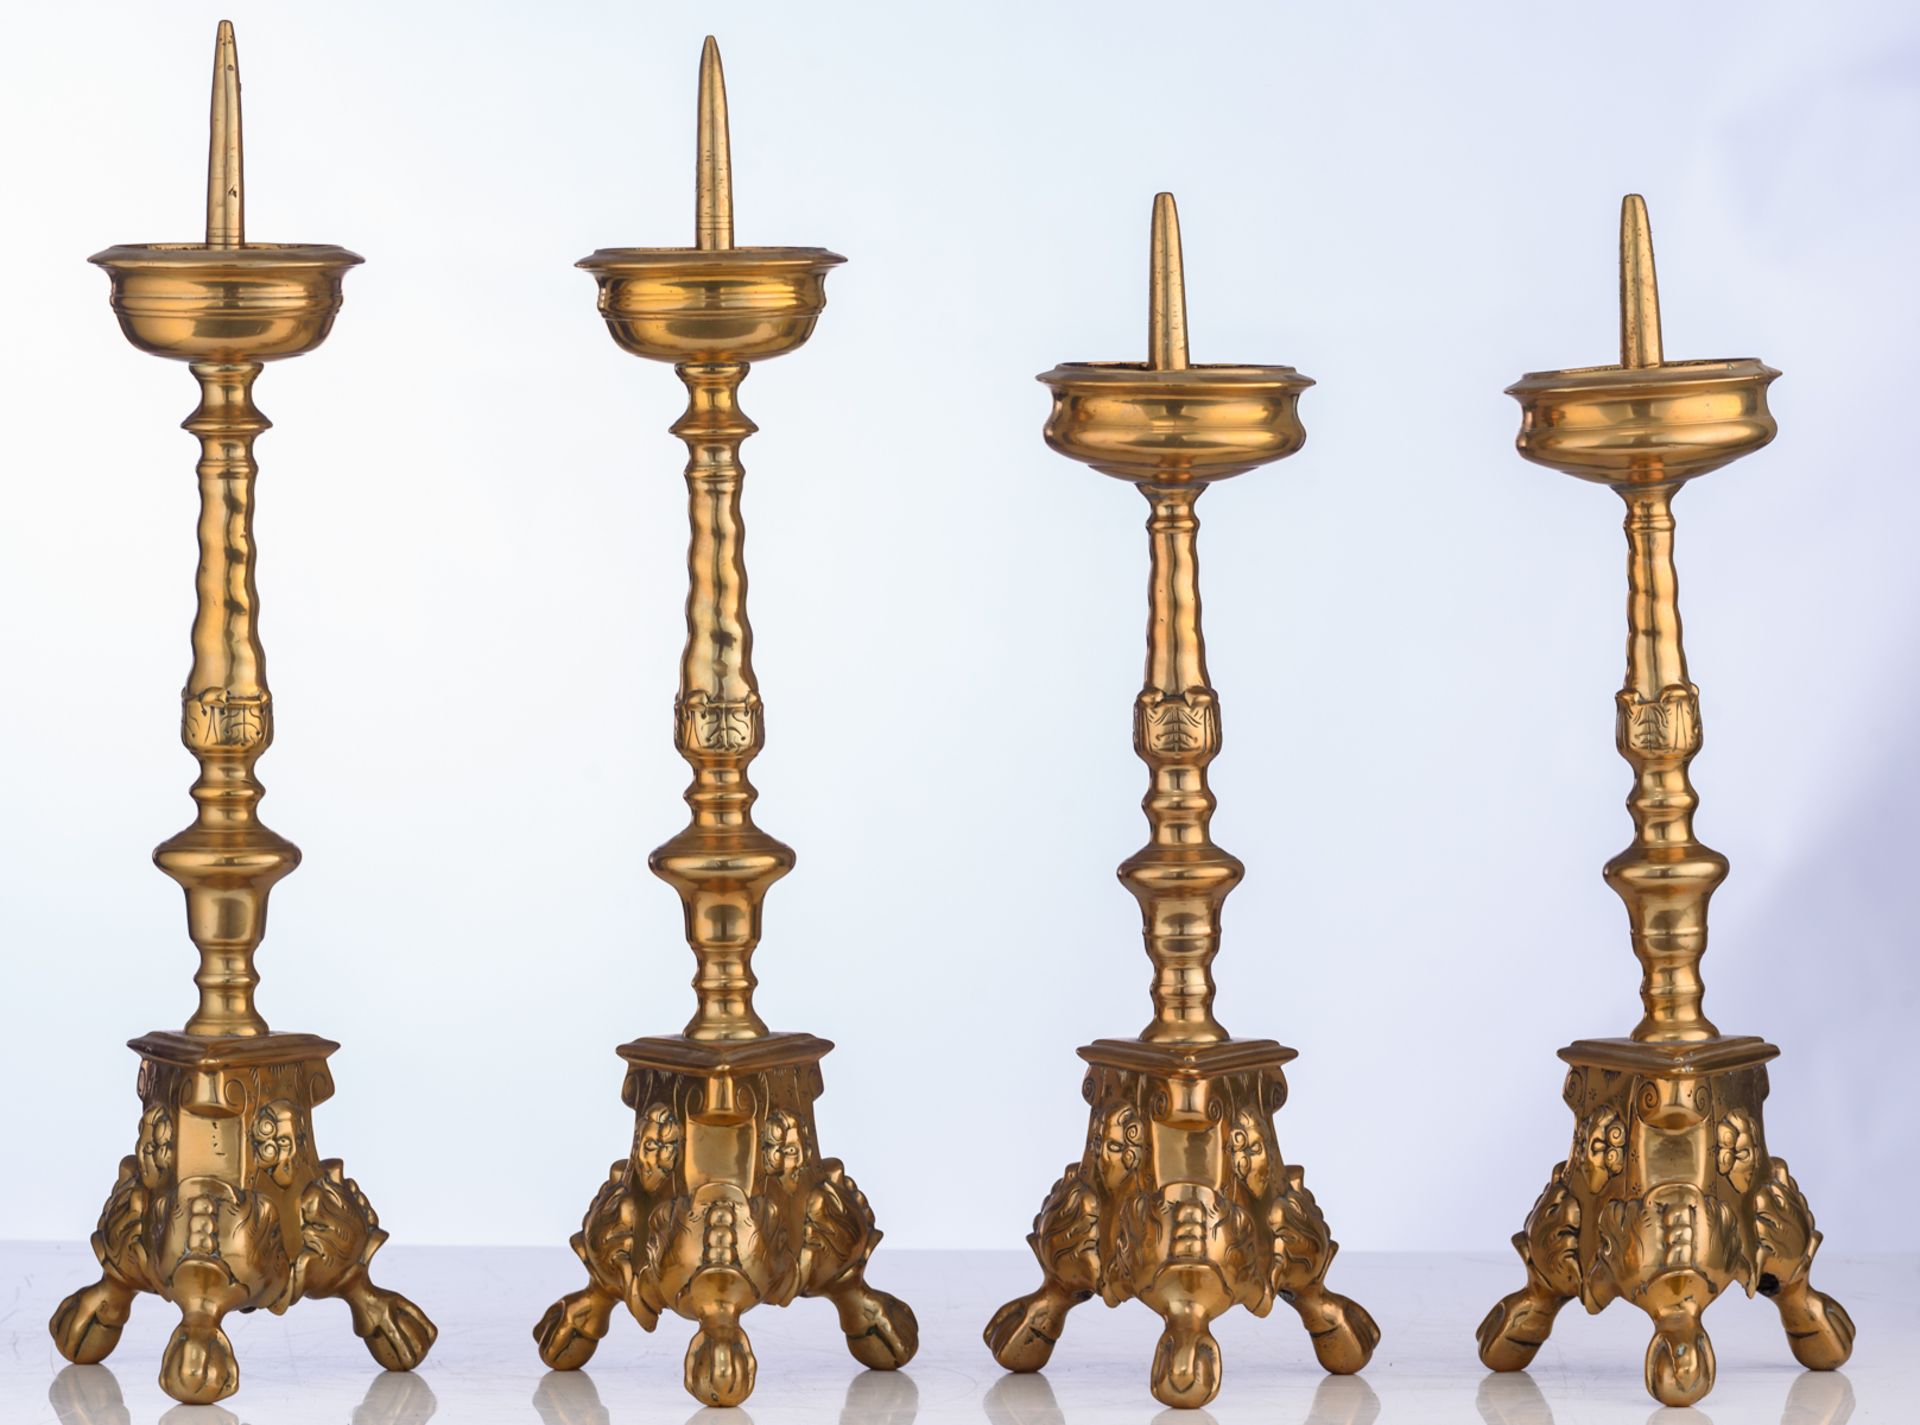 Two pair of Baroque bronze church candlesticks, 17thC, H 38,5 - 43 cm - Image 2 of 7